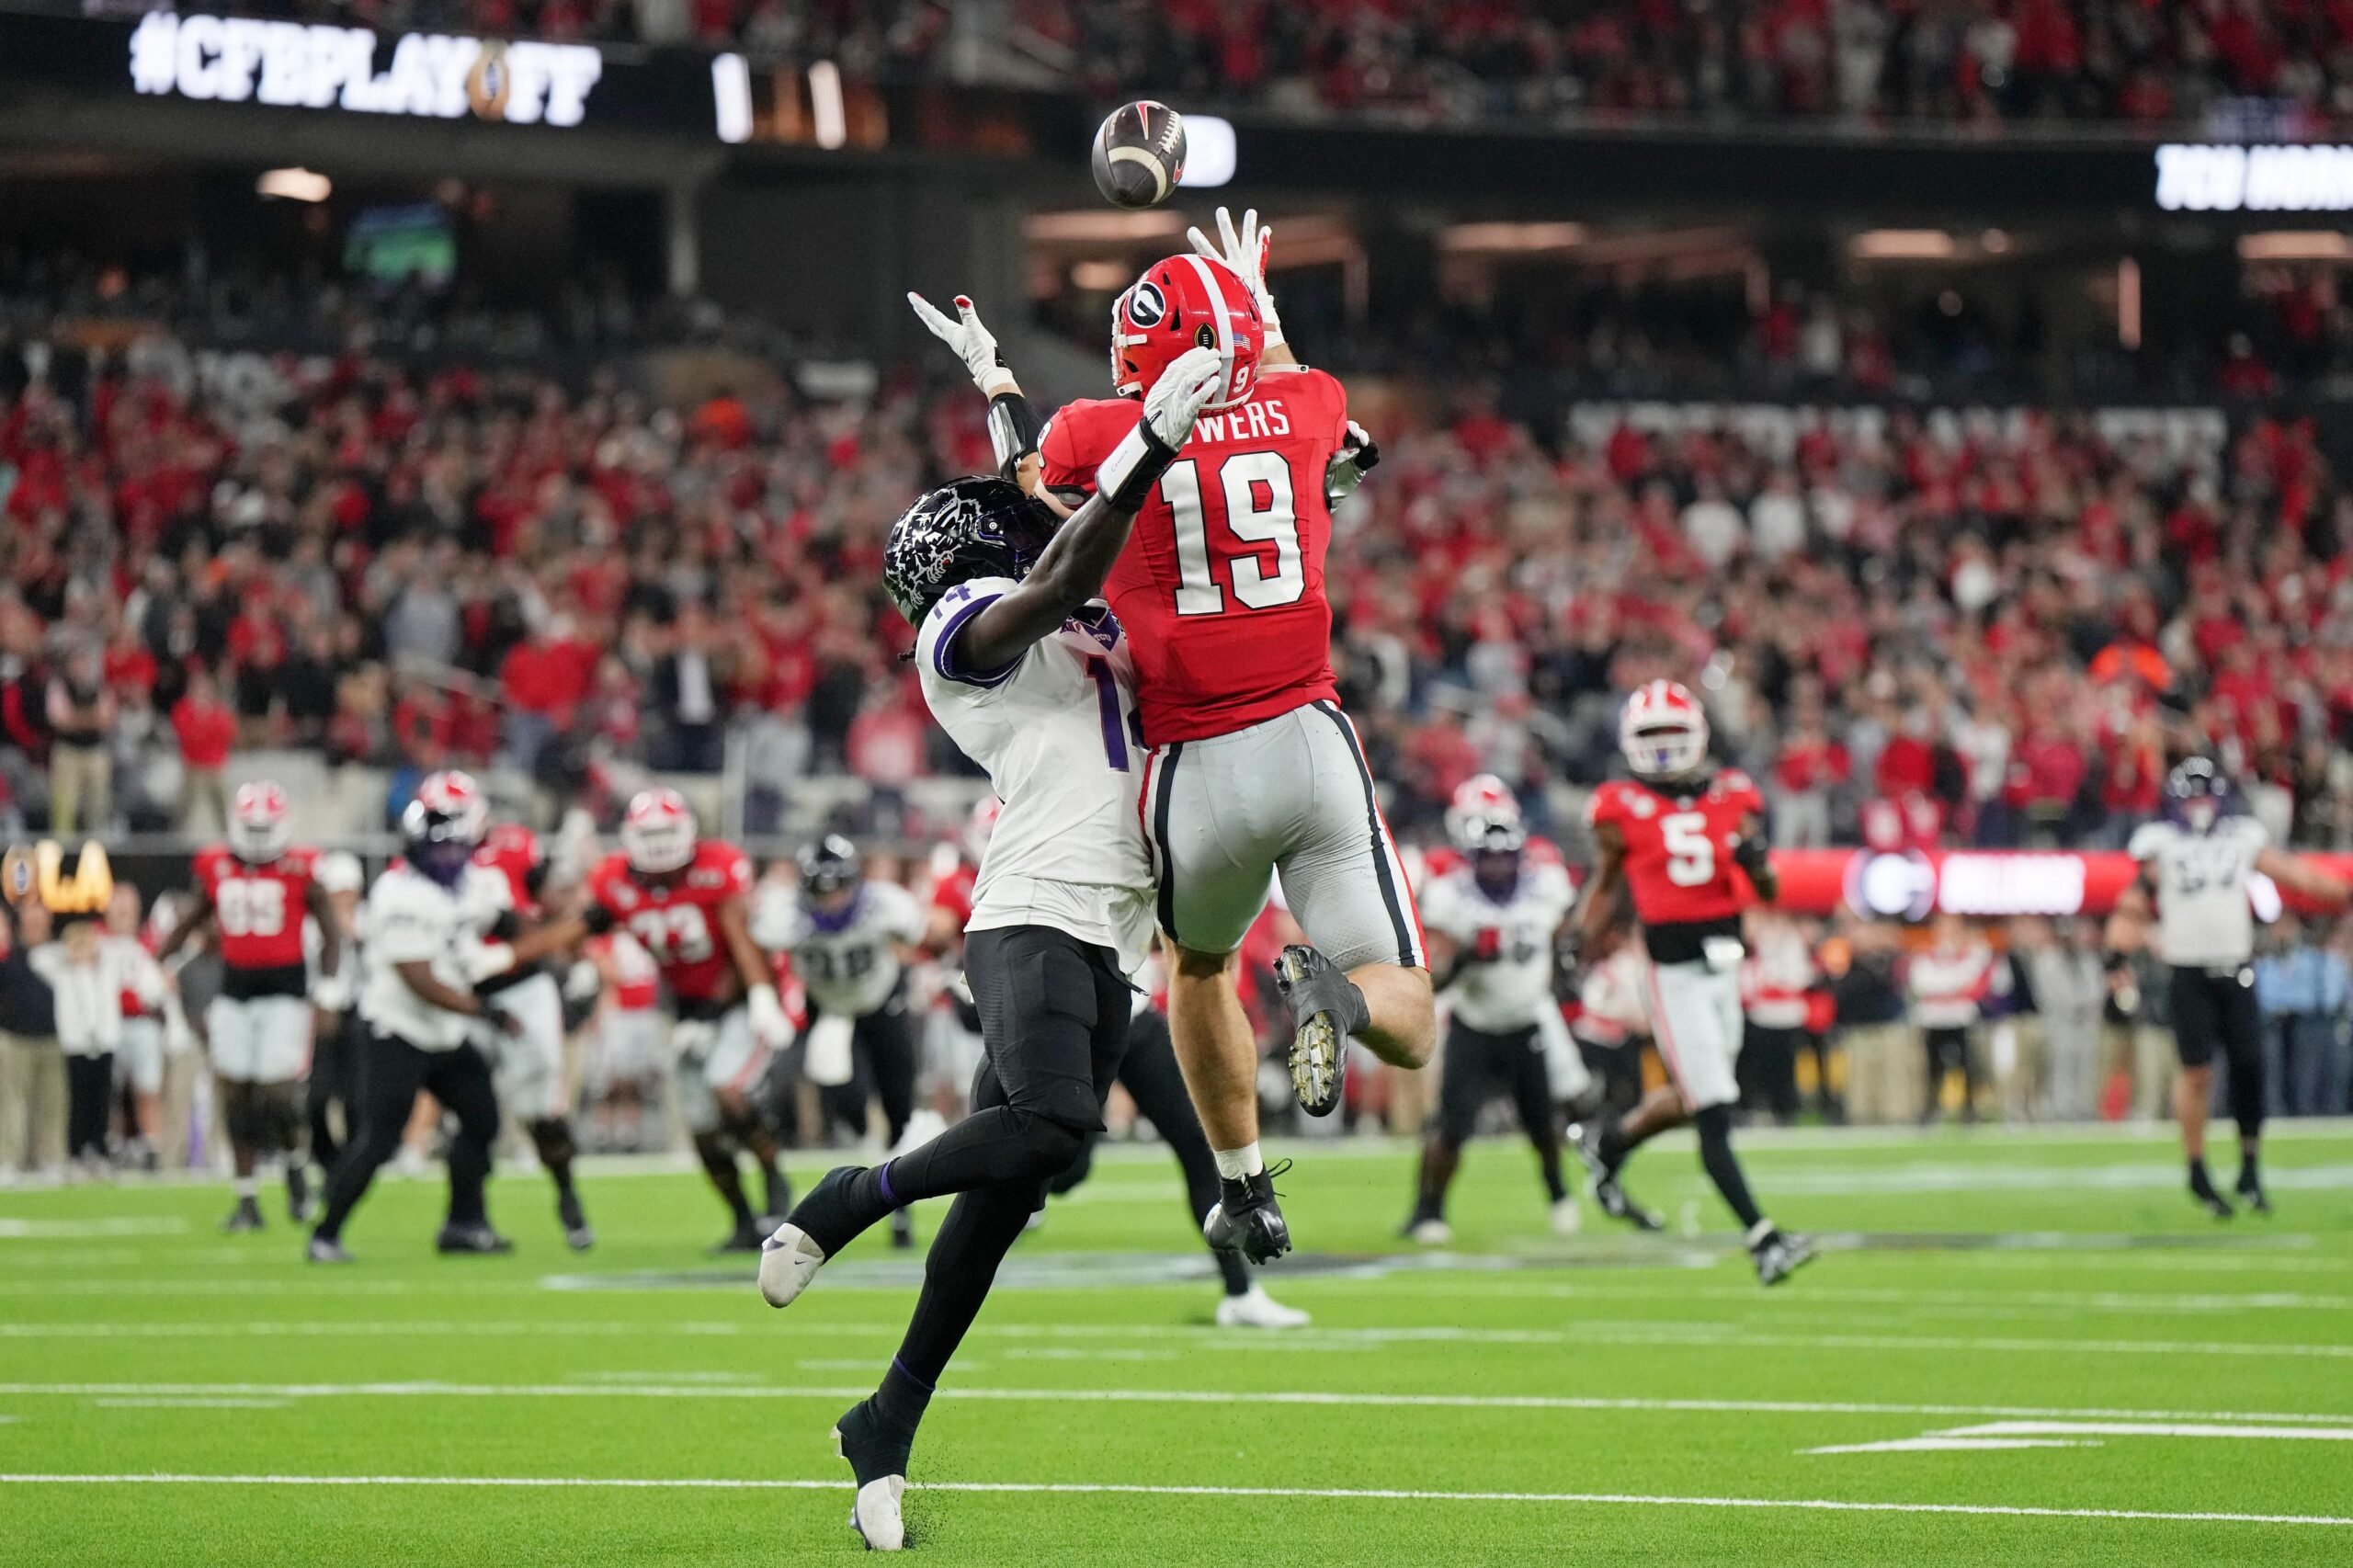 Georgia Bulldogs tight end Brock Bowers (19) makes a catch for a touchdown against TCU Horned Frogs safety Abraham Camara (14) during the third quarter of the CFP national championship game at SoFi Stadium. 